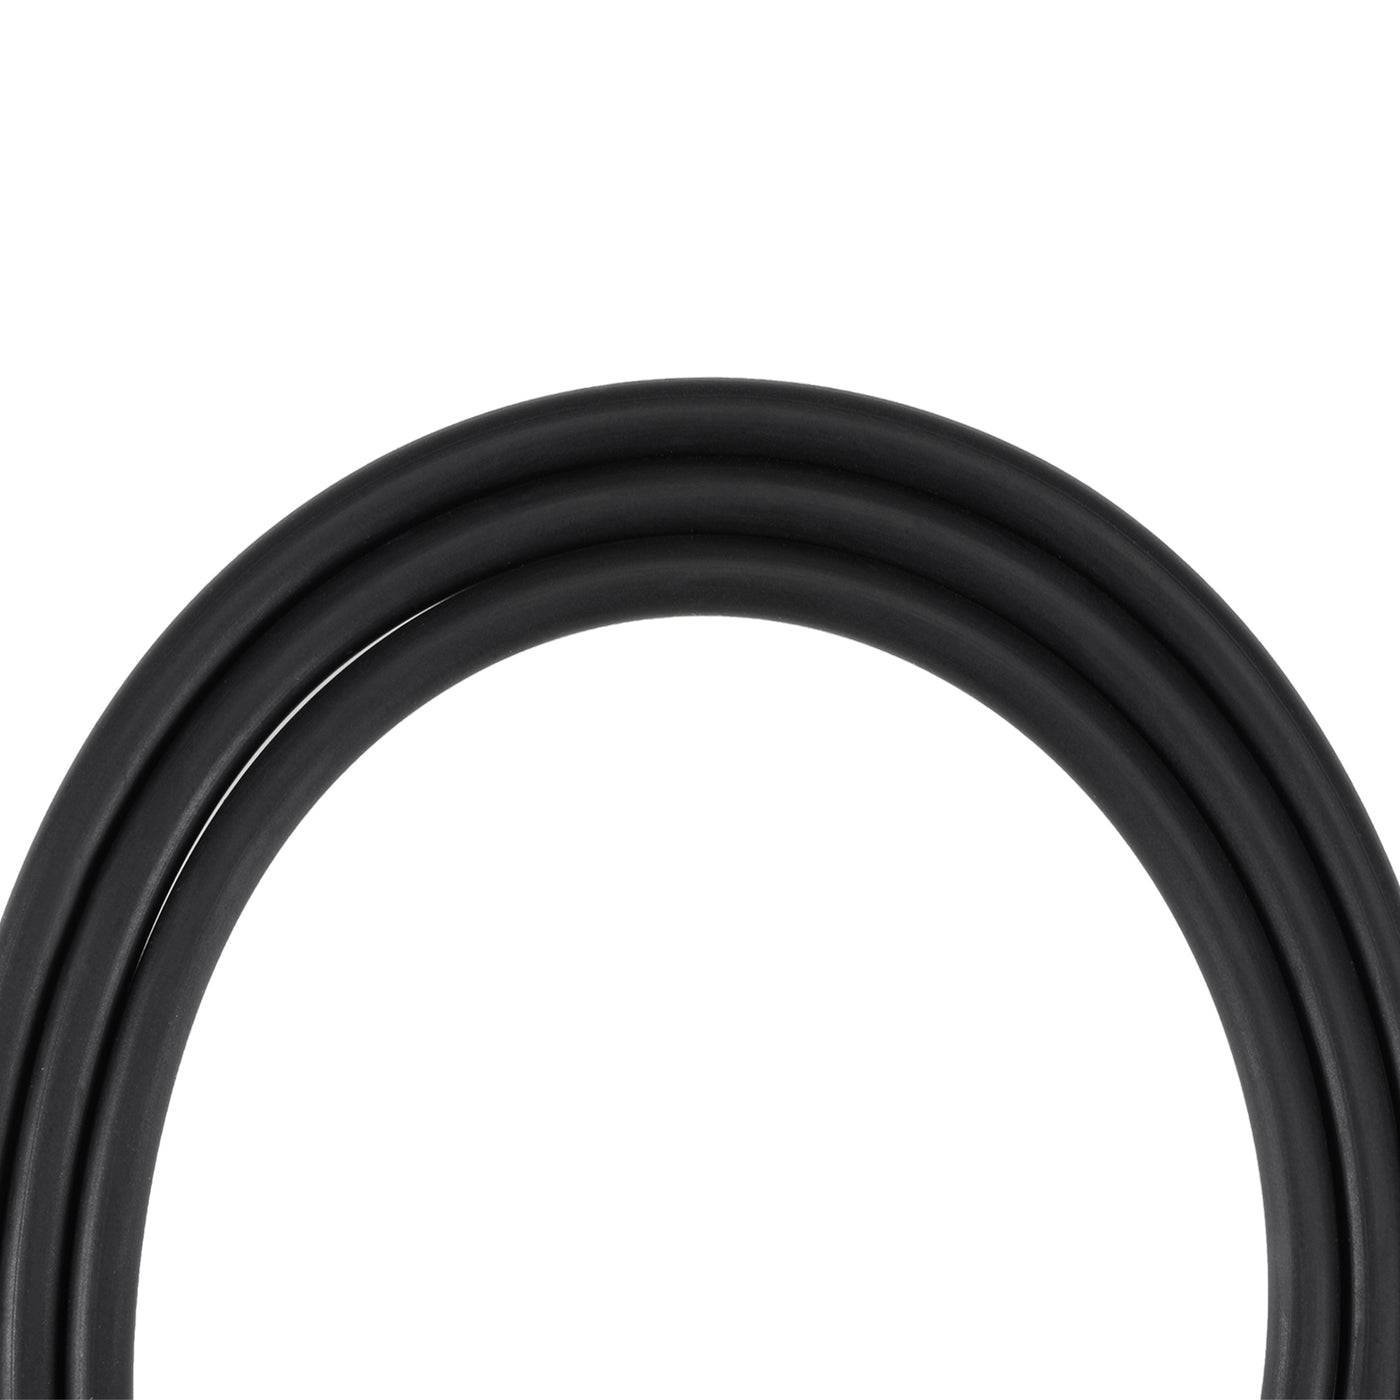 Uxcell Uxcell Fuel Line Hose 3mm ID 5mm OD 26ft Oil Line & Fuel Pipe Rubber Water Hose Black